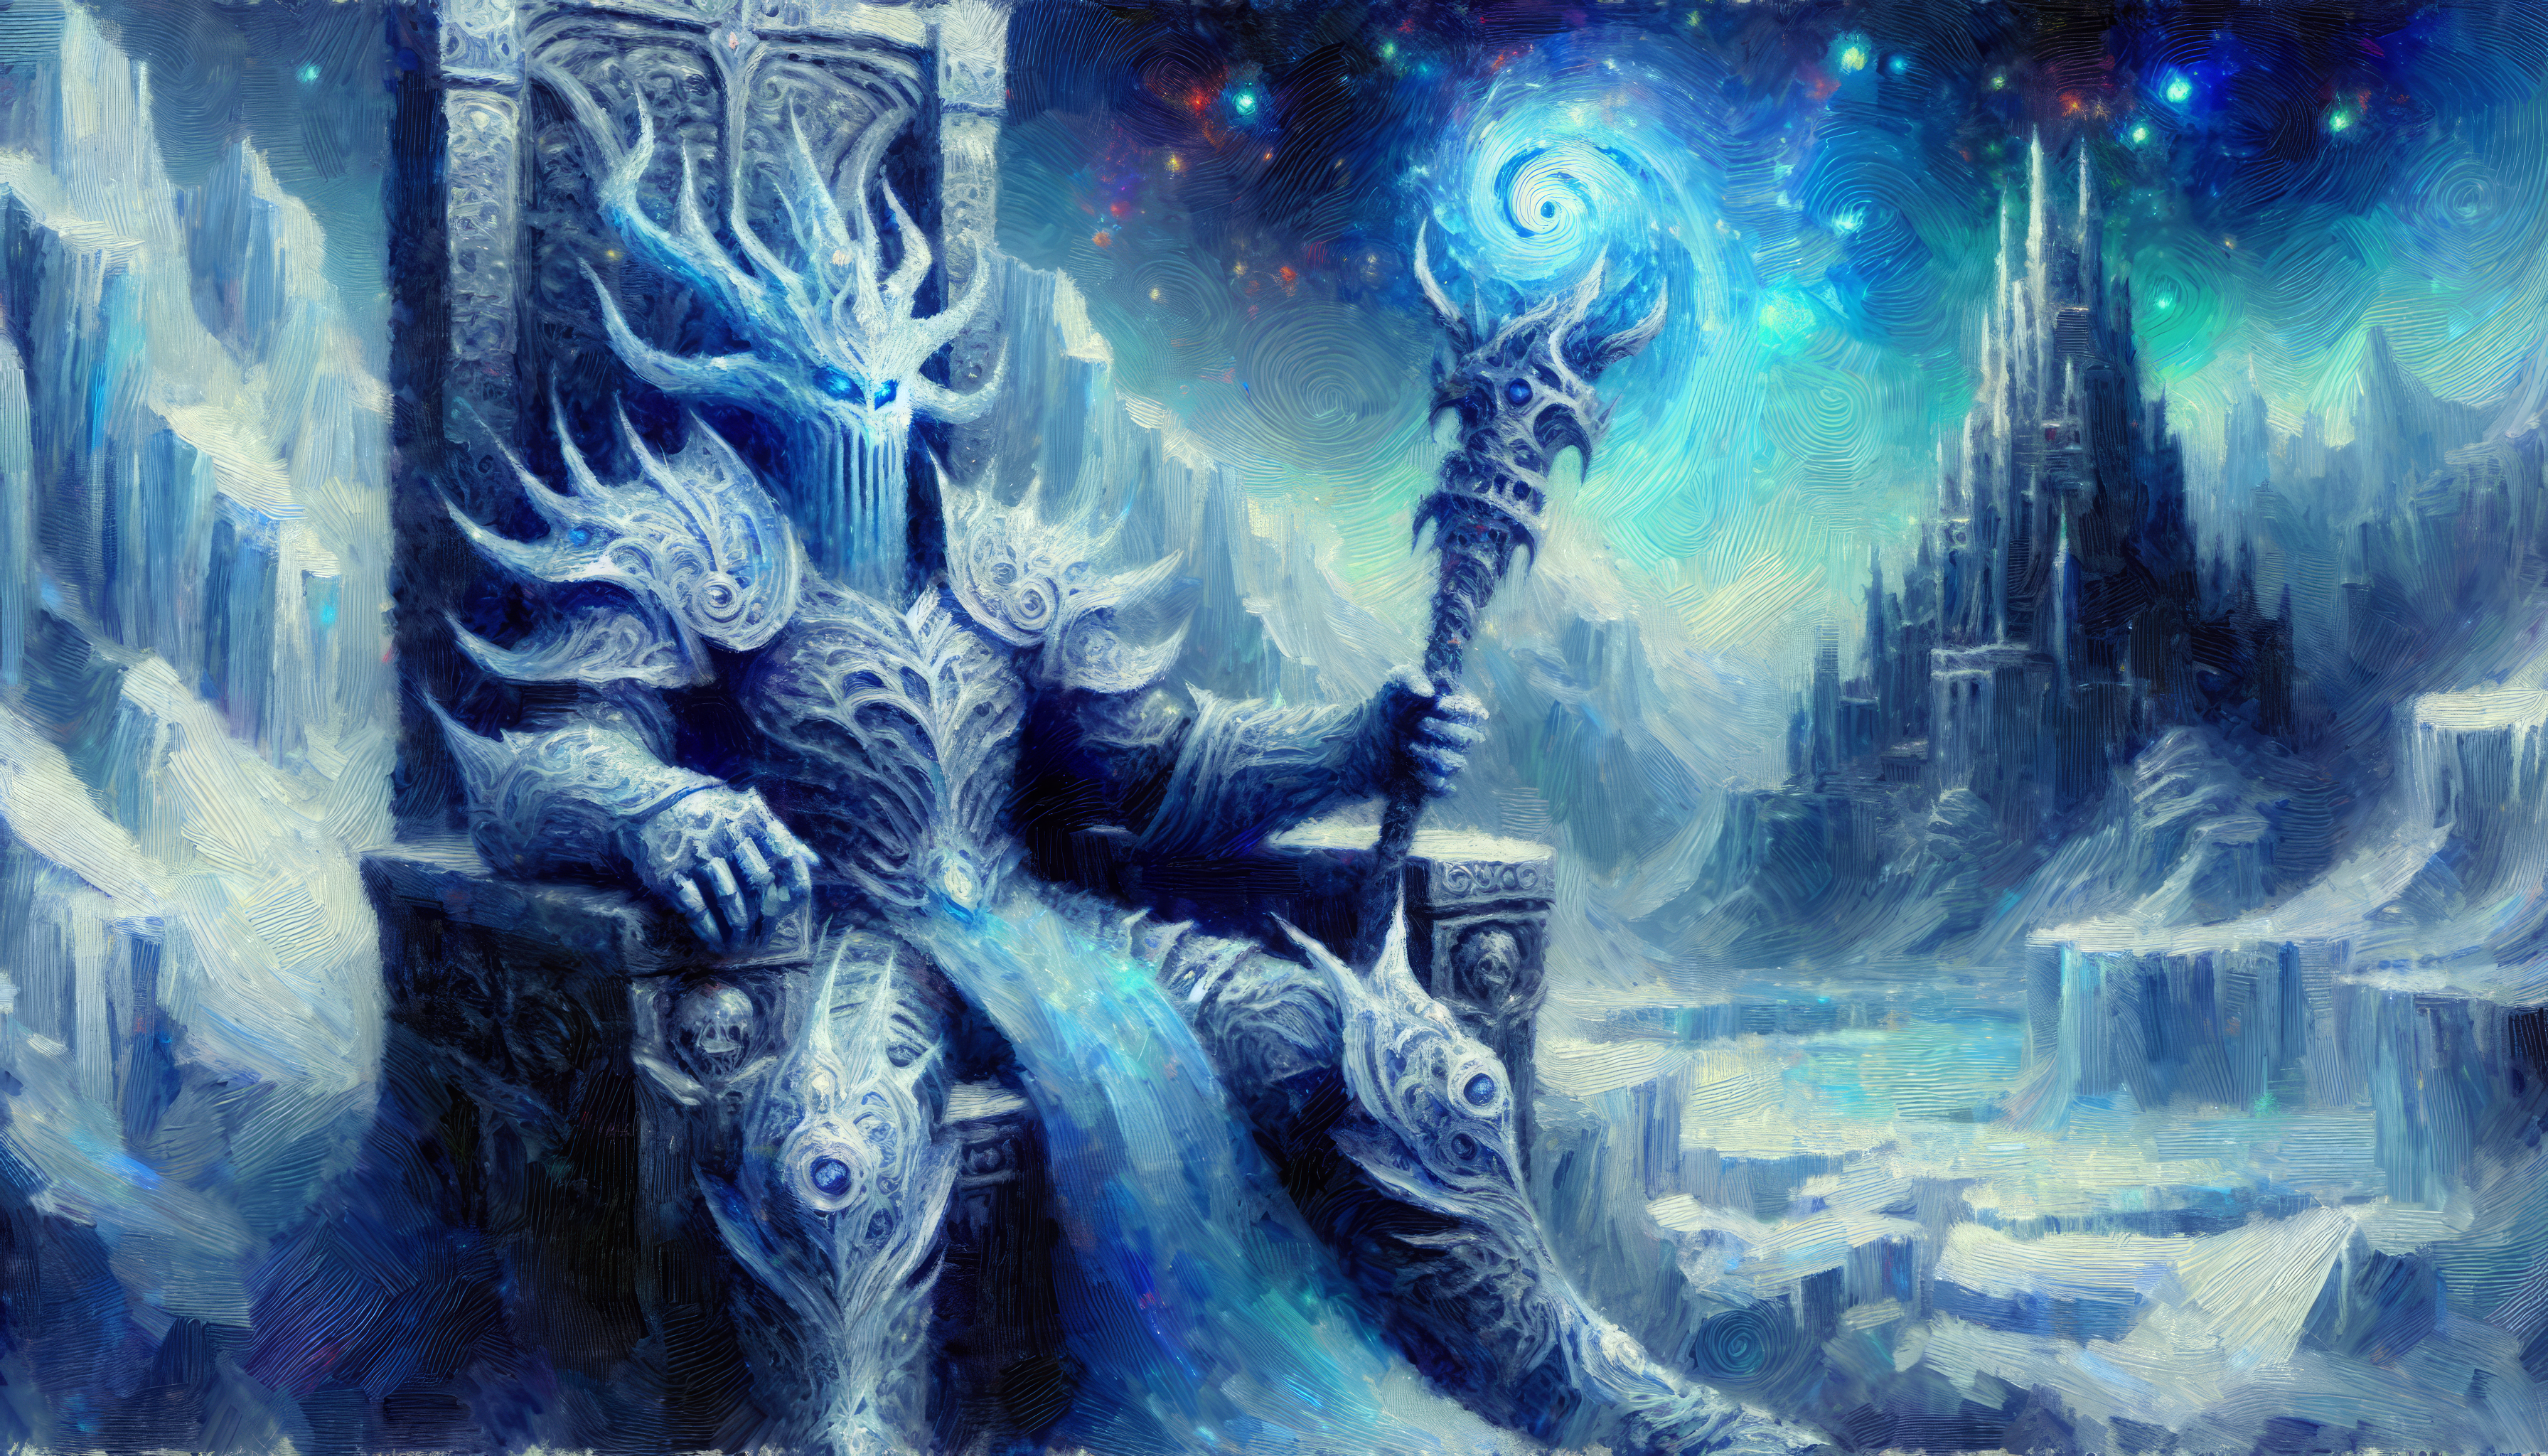 HD desktop wallpaper featuring the Lich King seated on a frosty throne with a mystical staff in a snowy kingdom.